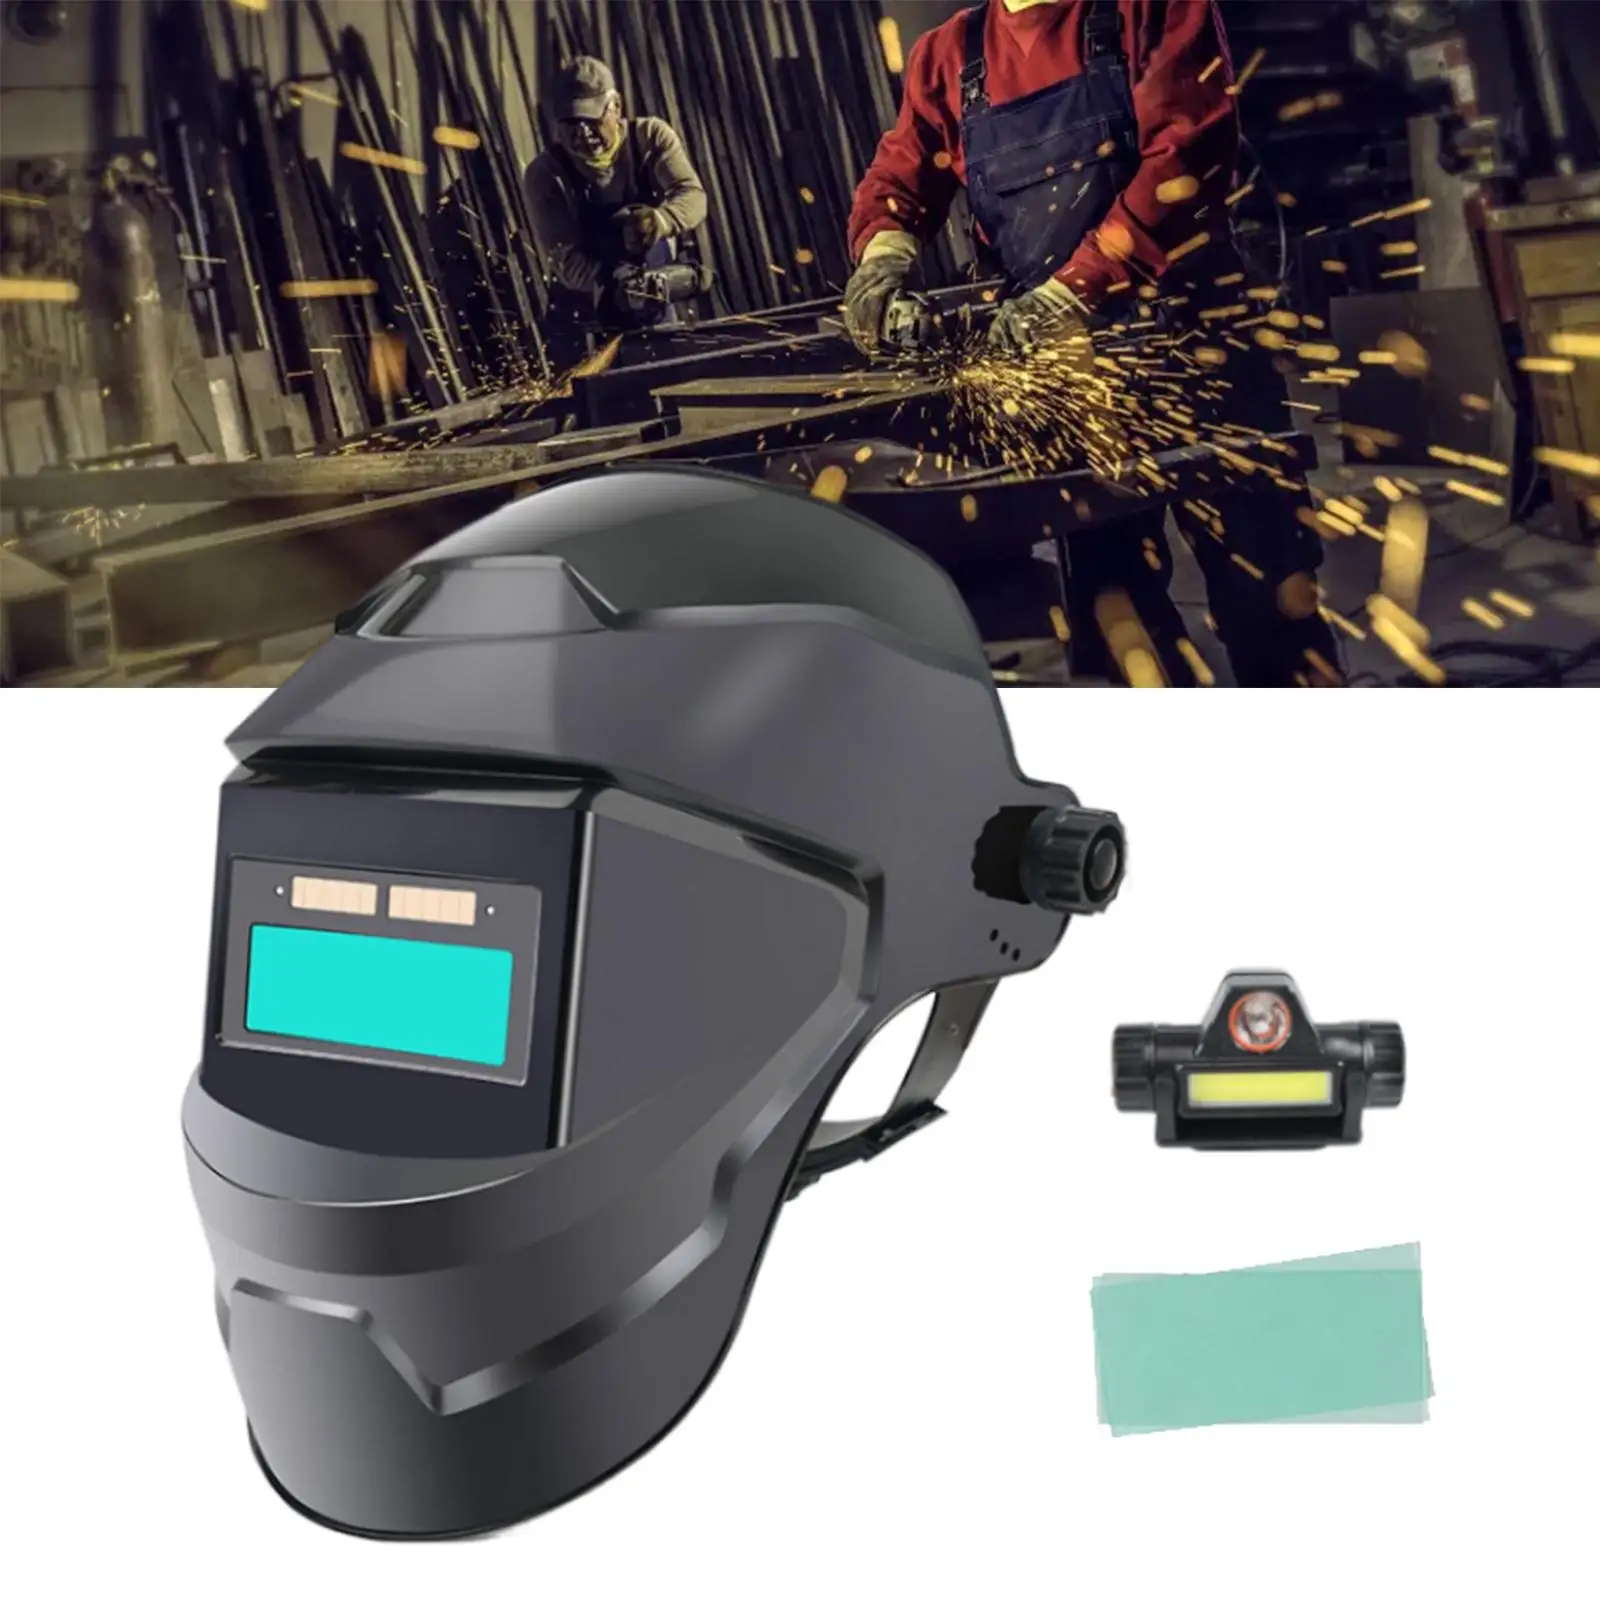 Solar Powered Welding Helmet Eyes and Face Protection Large Viewing Large Field of View Welding Face Cover Protective Gear